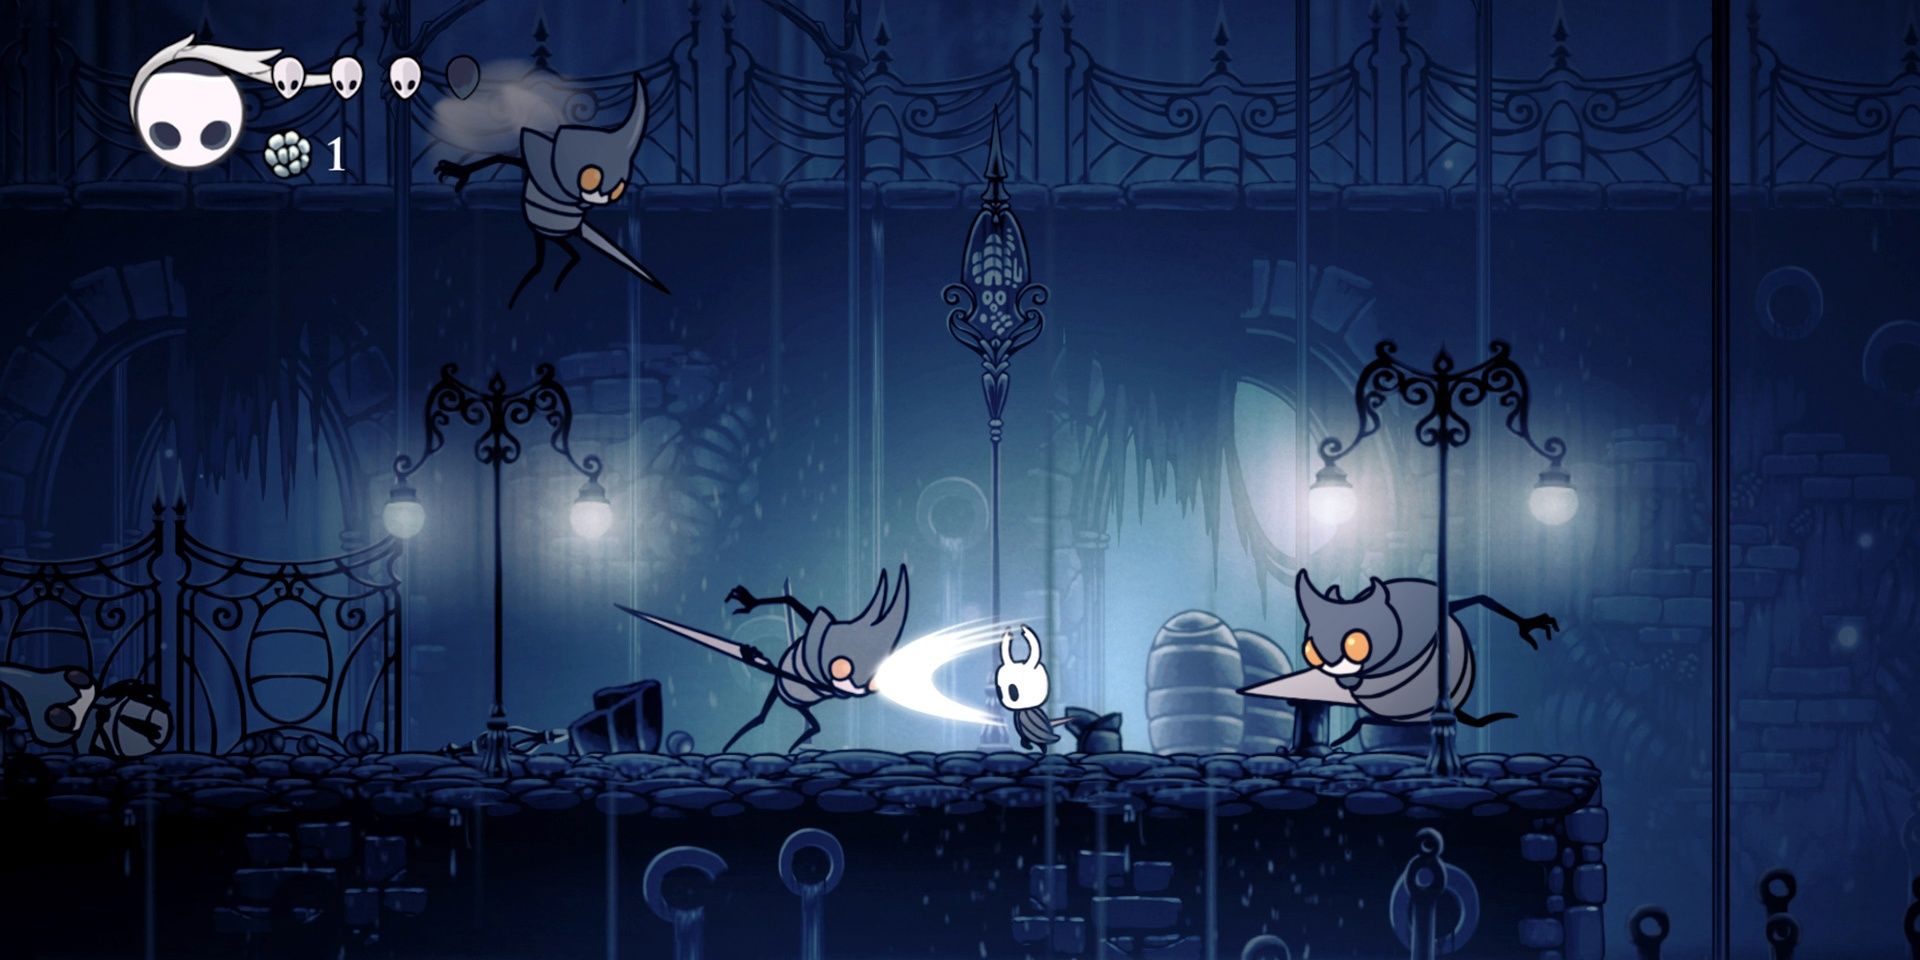 Knight fighting enemies in Hollow Knight